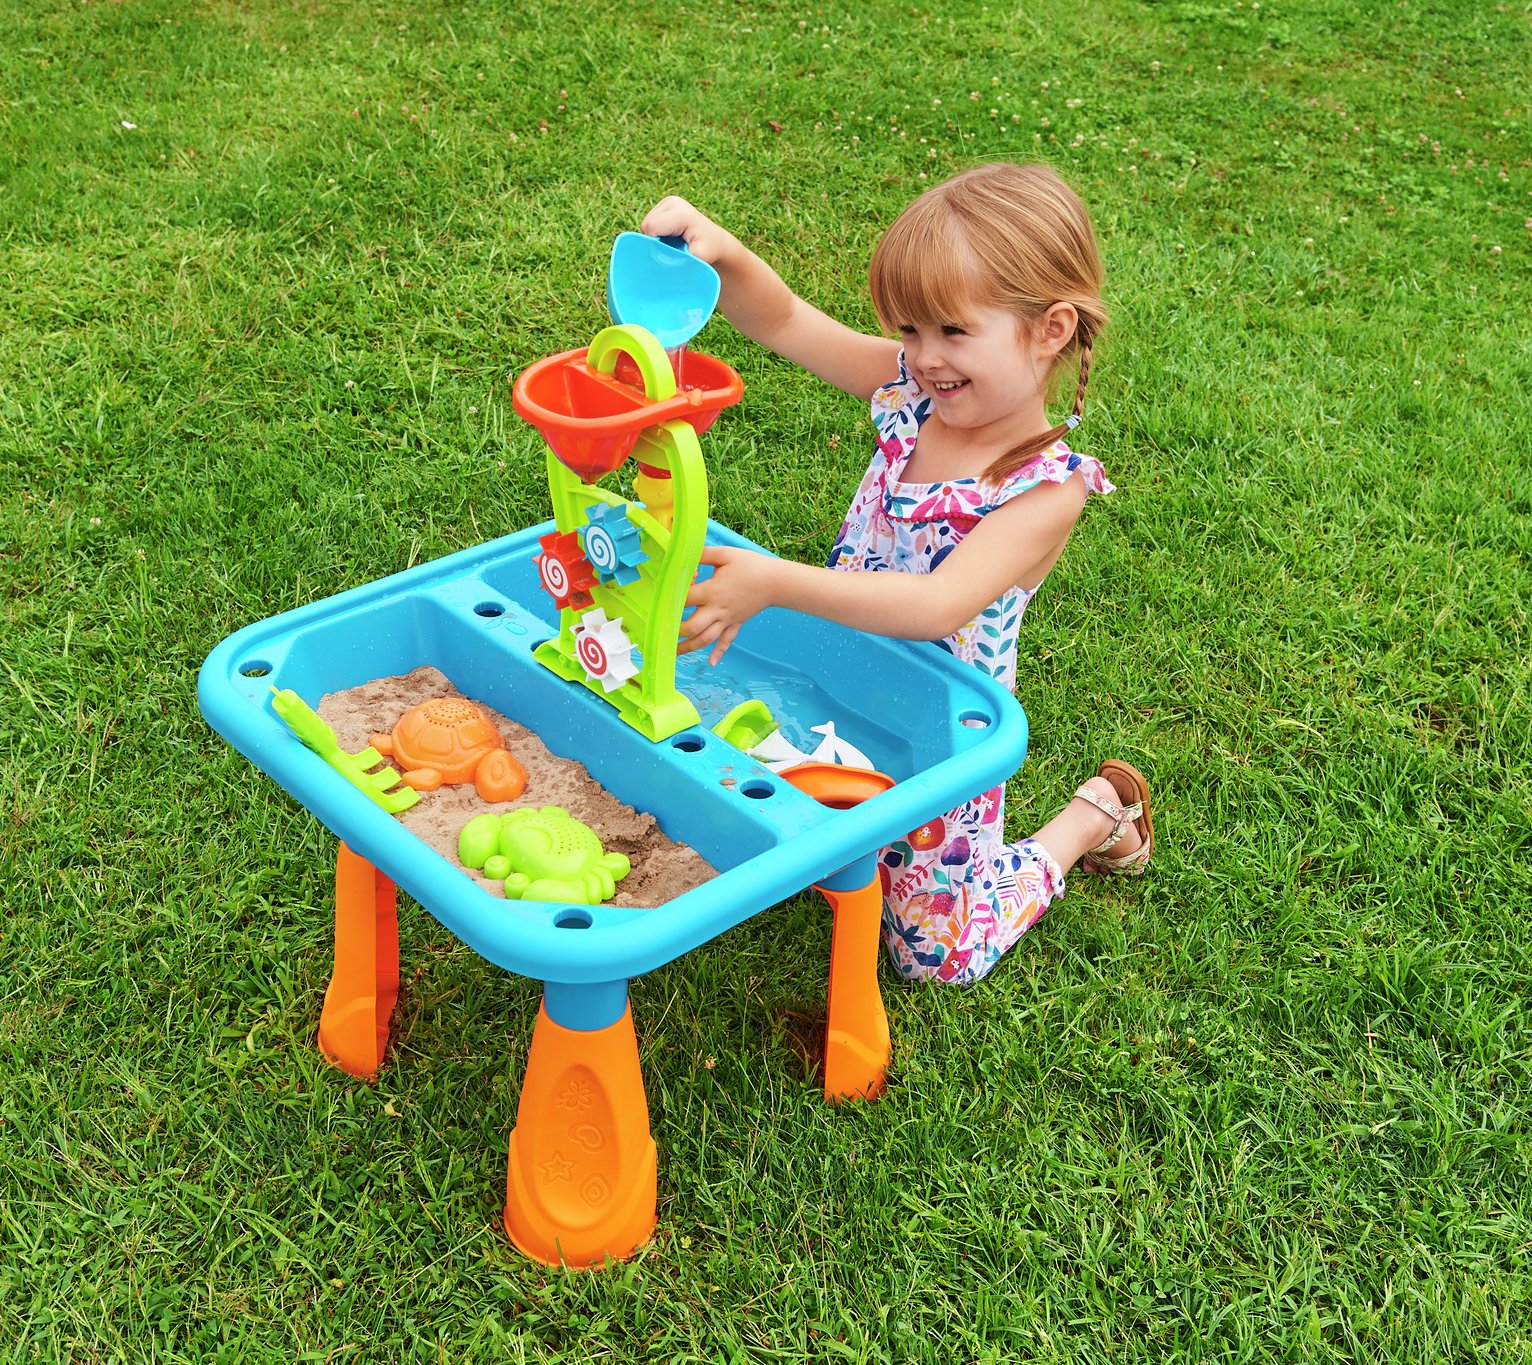 Chad Valley Sand and Water Table Review